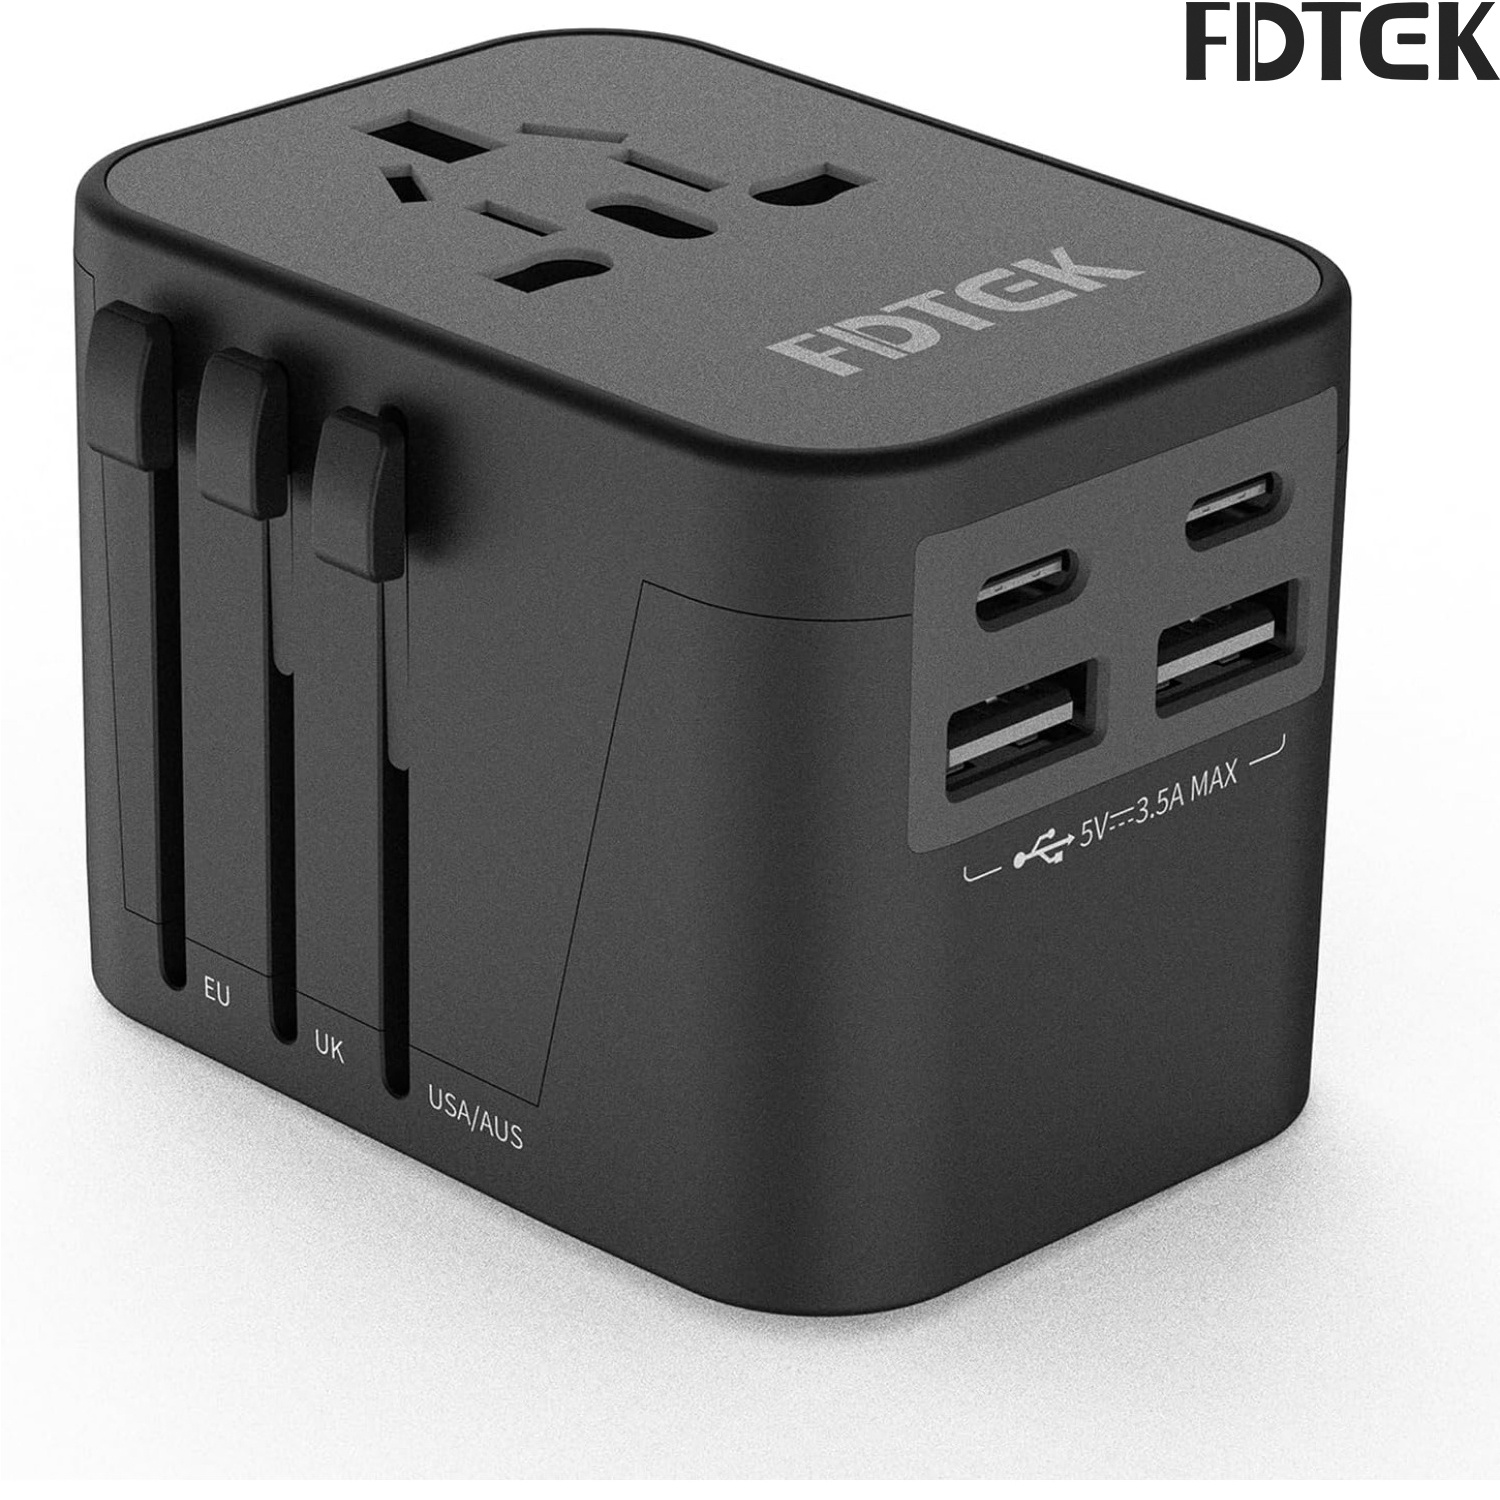 

Fdtek Universal Travel Adapter, International Universal Adapter European Travel Plug Adapter With 4 Usb Ports (2 Usb C) All-in-one Worldwide Adapter For Europe Uk Aus Asia Japan Covers 300+countries